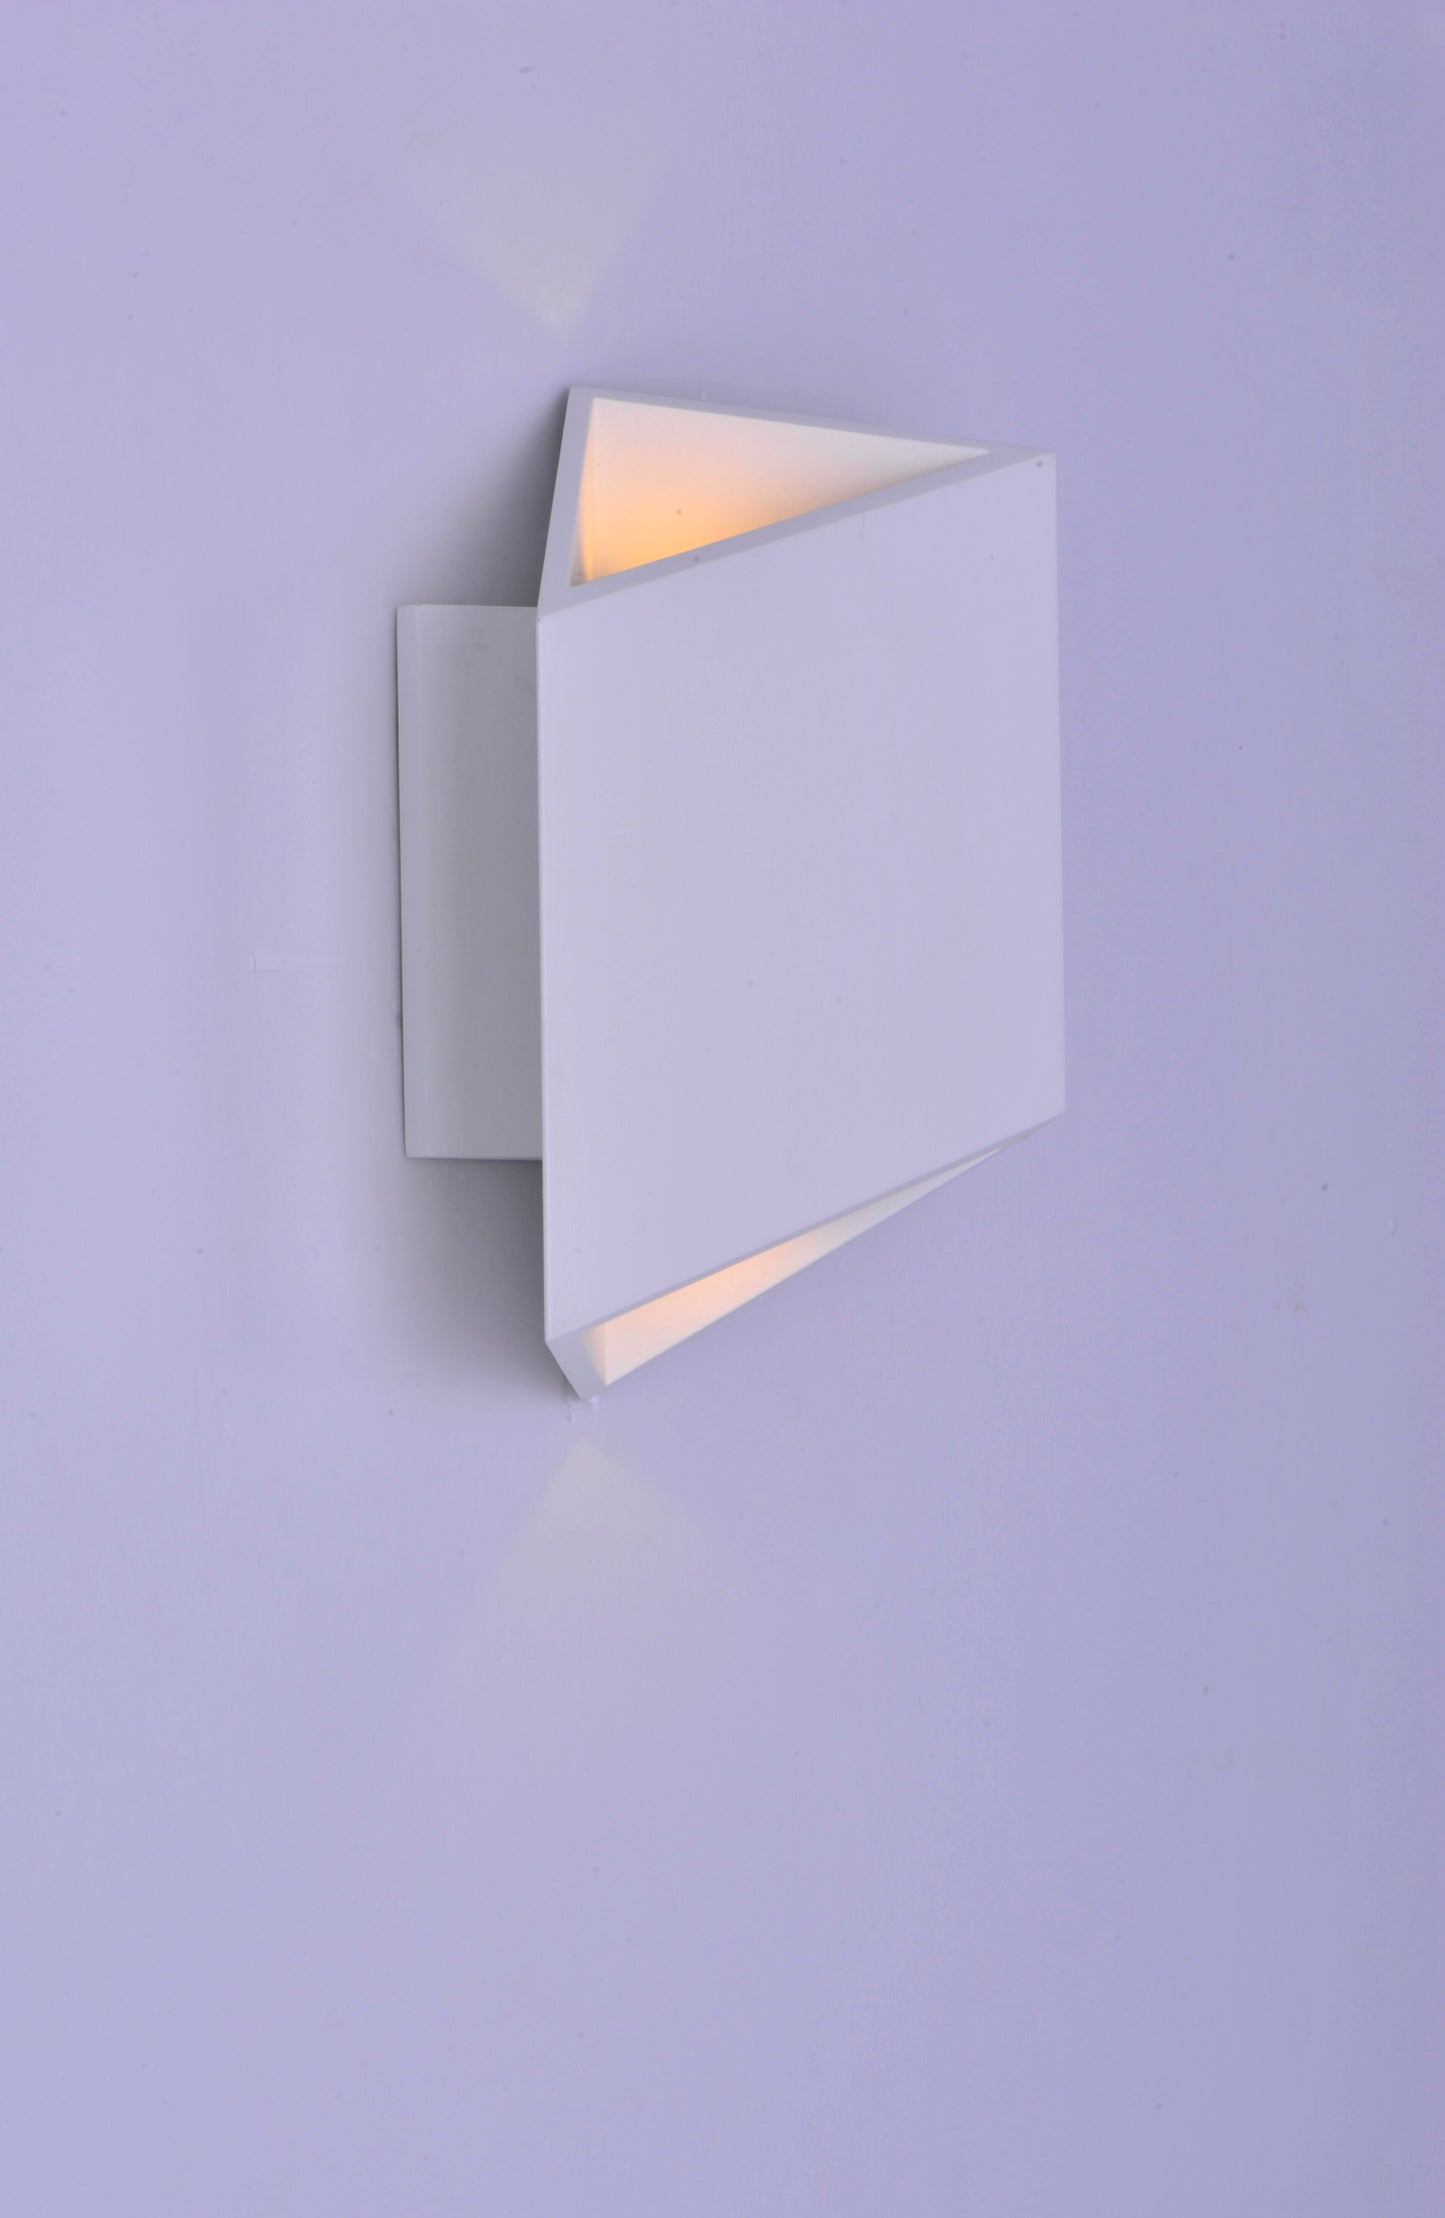 E41373-WT - Alumilux Facet 8.5" Outdoor Wall Sconce - White